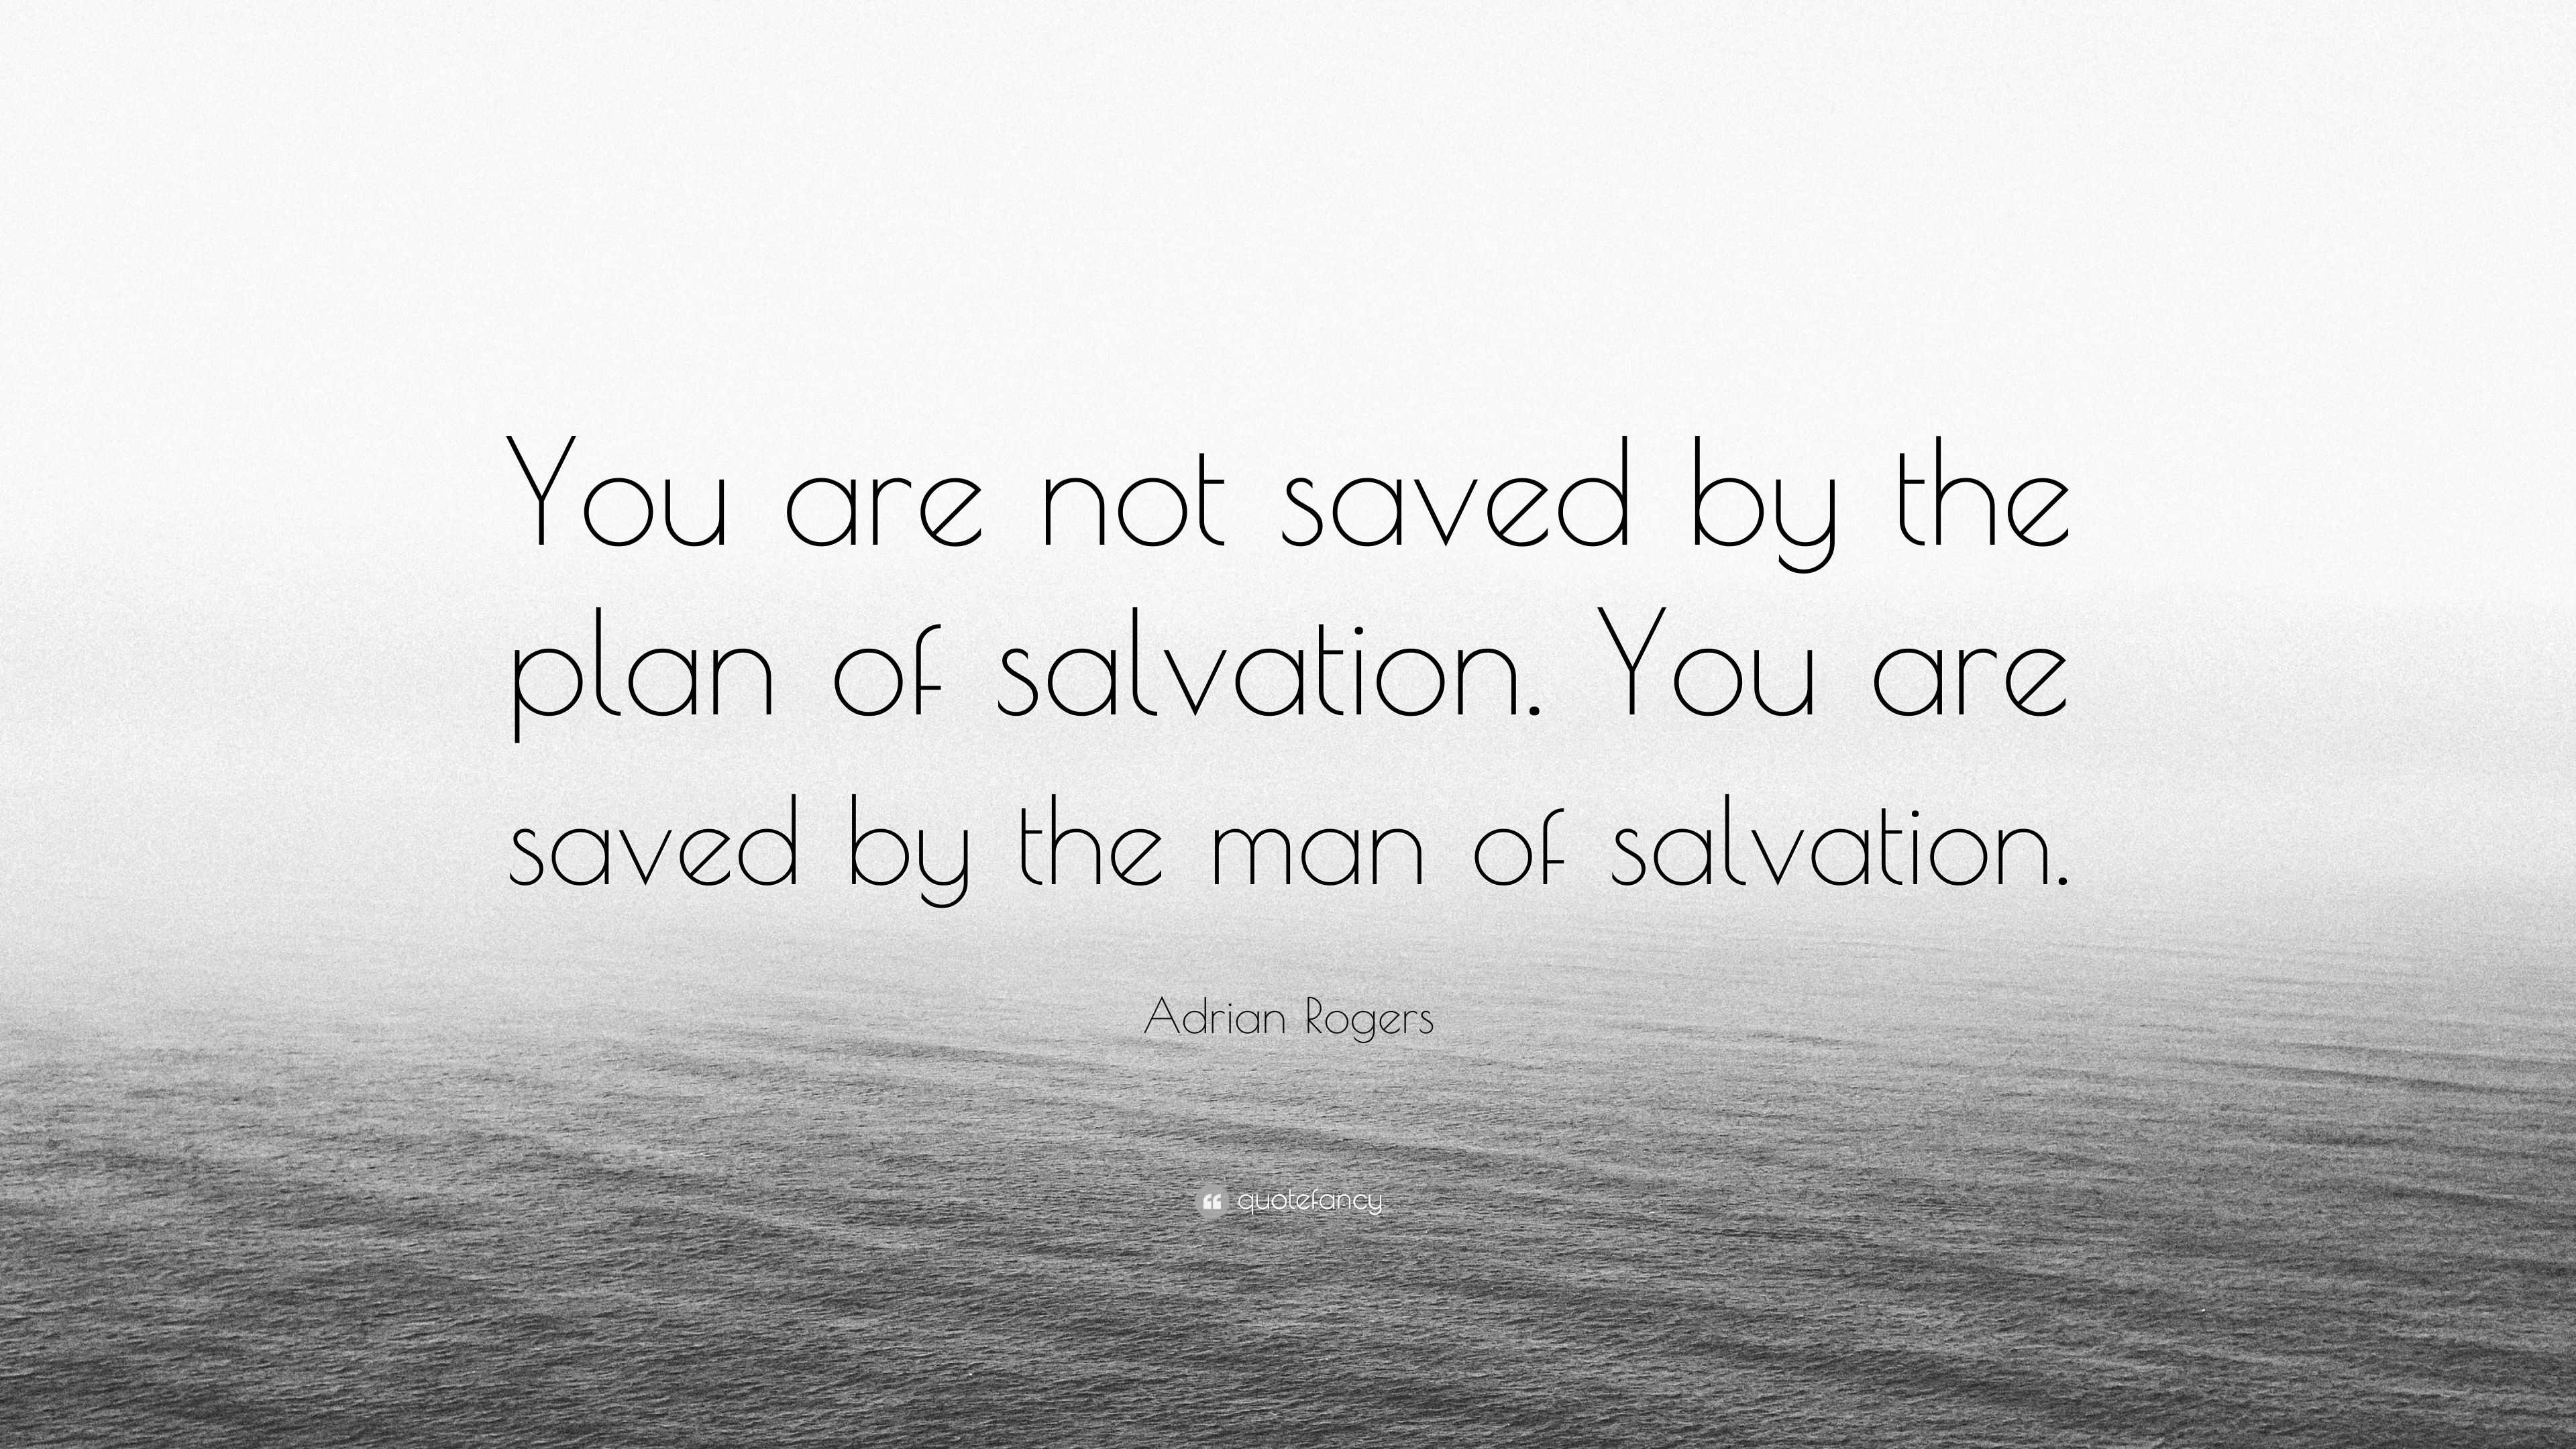 how can you know that you are saved without a shadow of a doubt